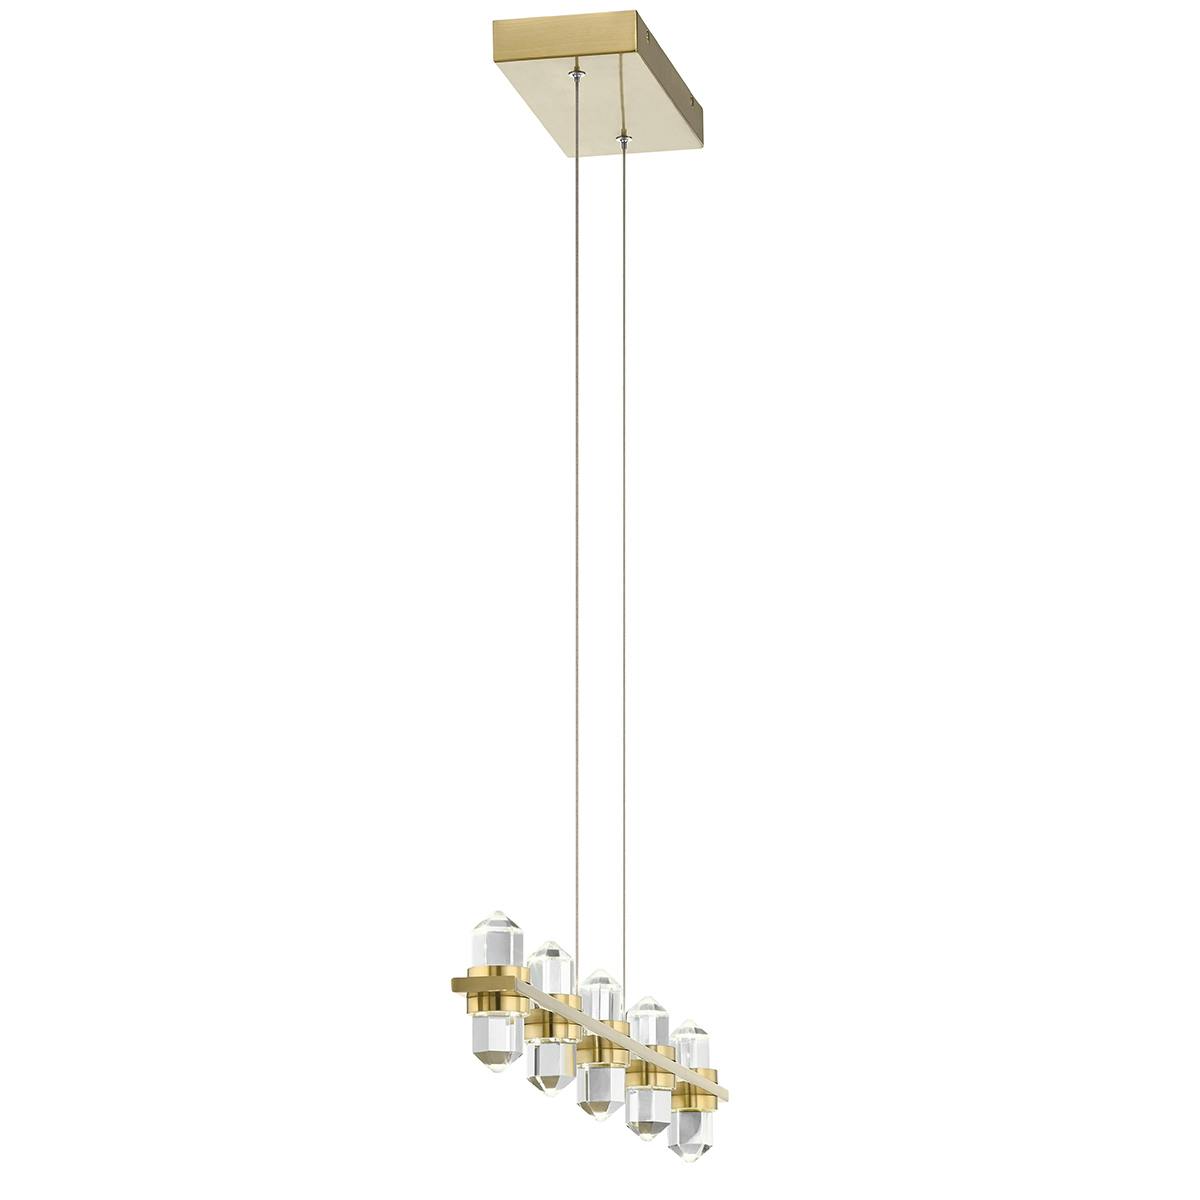 Profile view of the Arabella 3000K 5 Light Chandelier Gold on a white background